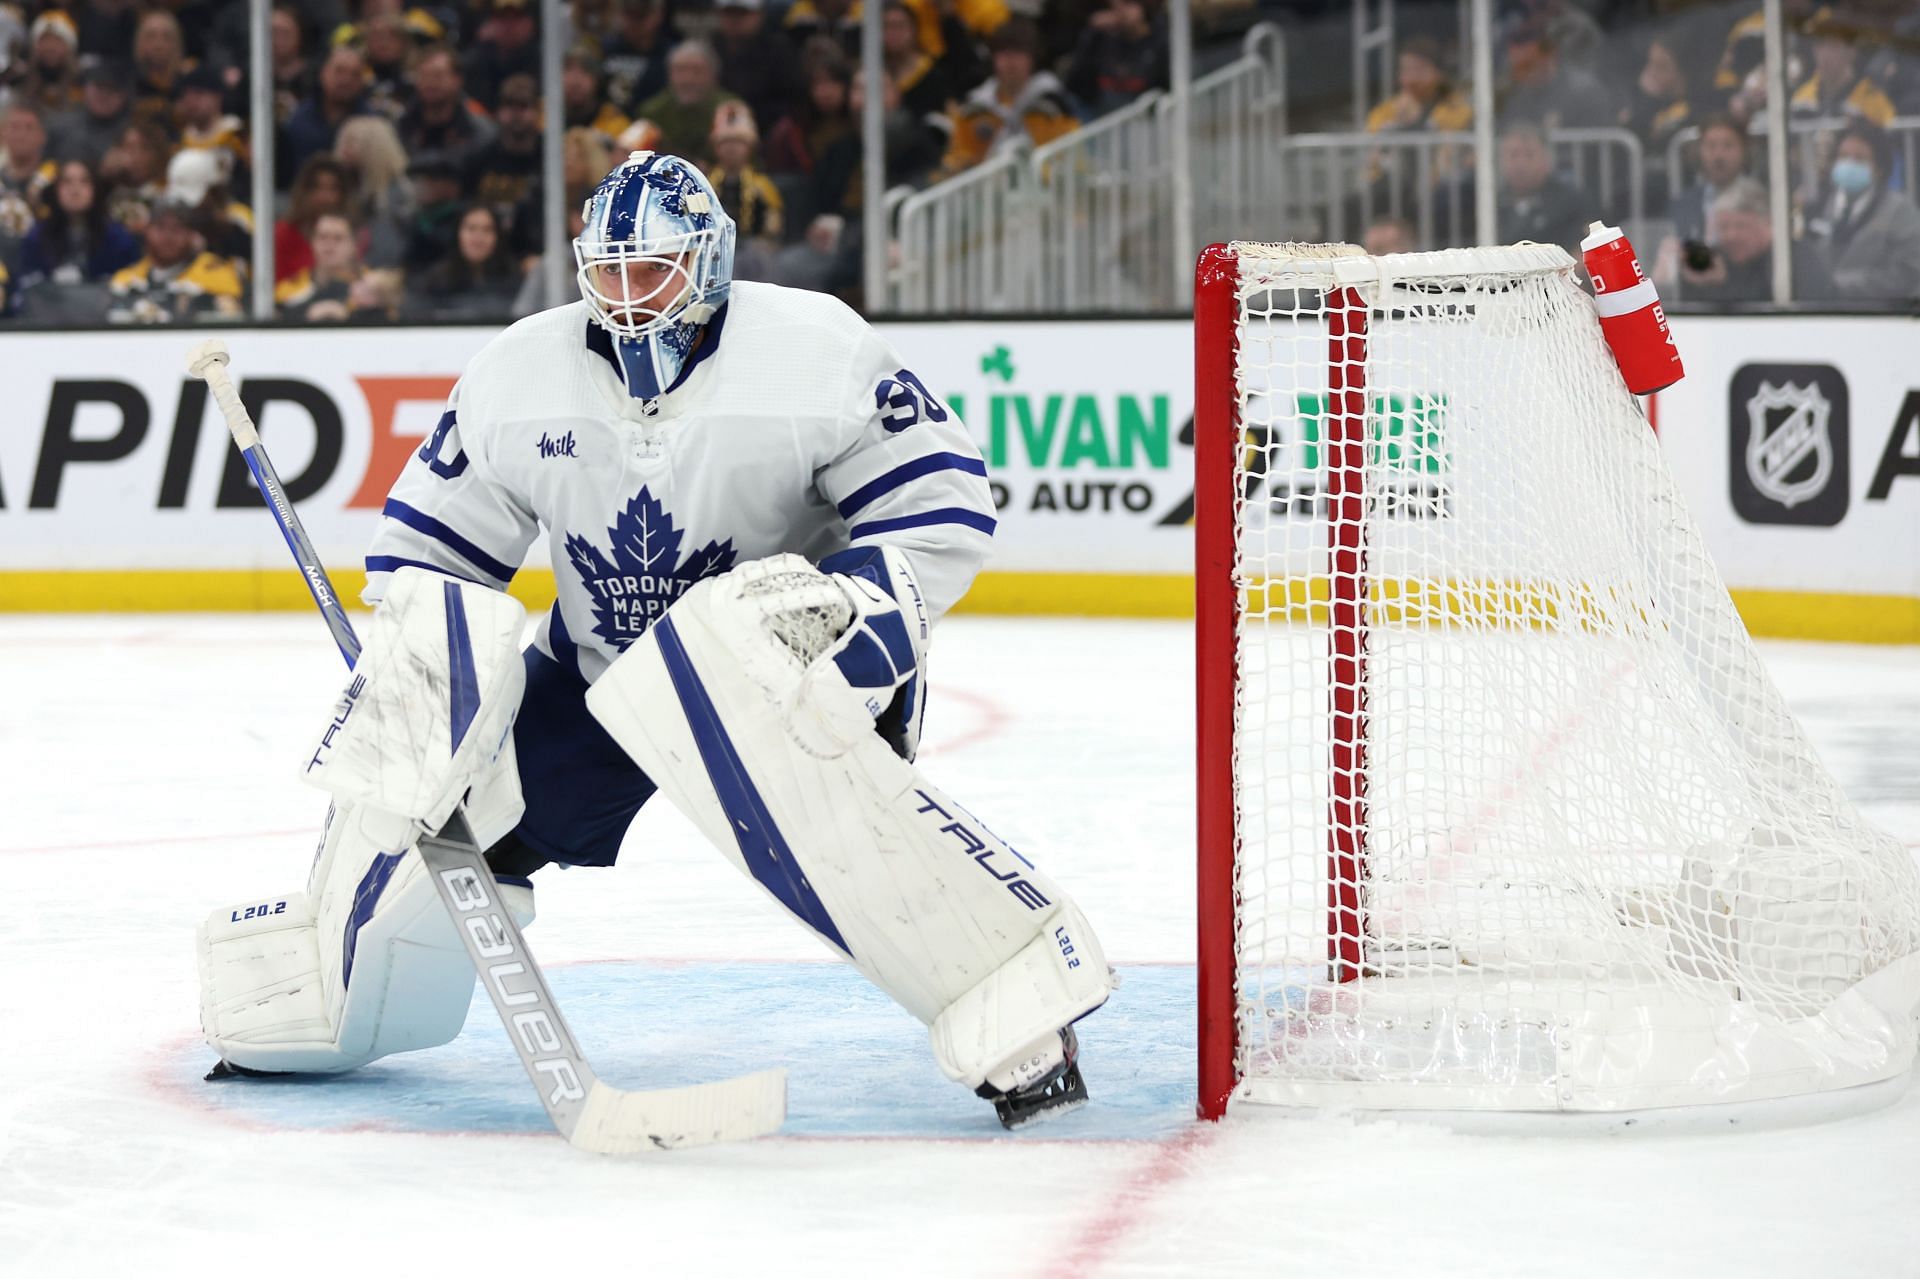 Matt Murray #30 of the Toronto Maple Leafs tends net during the third period against the Boston Bruins at TD Garden on January 14, 2023 in Boston, Massachusetts. The Bruins defeat the Maple Leafs 4-3. (Photo by Maddie Meyer/Getty Images)